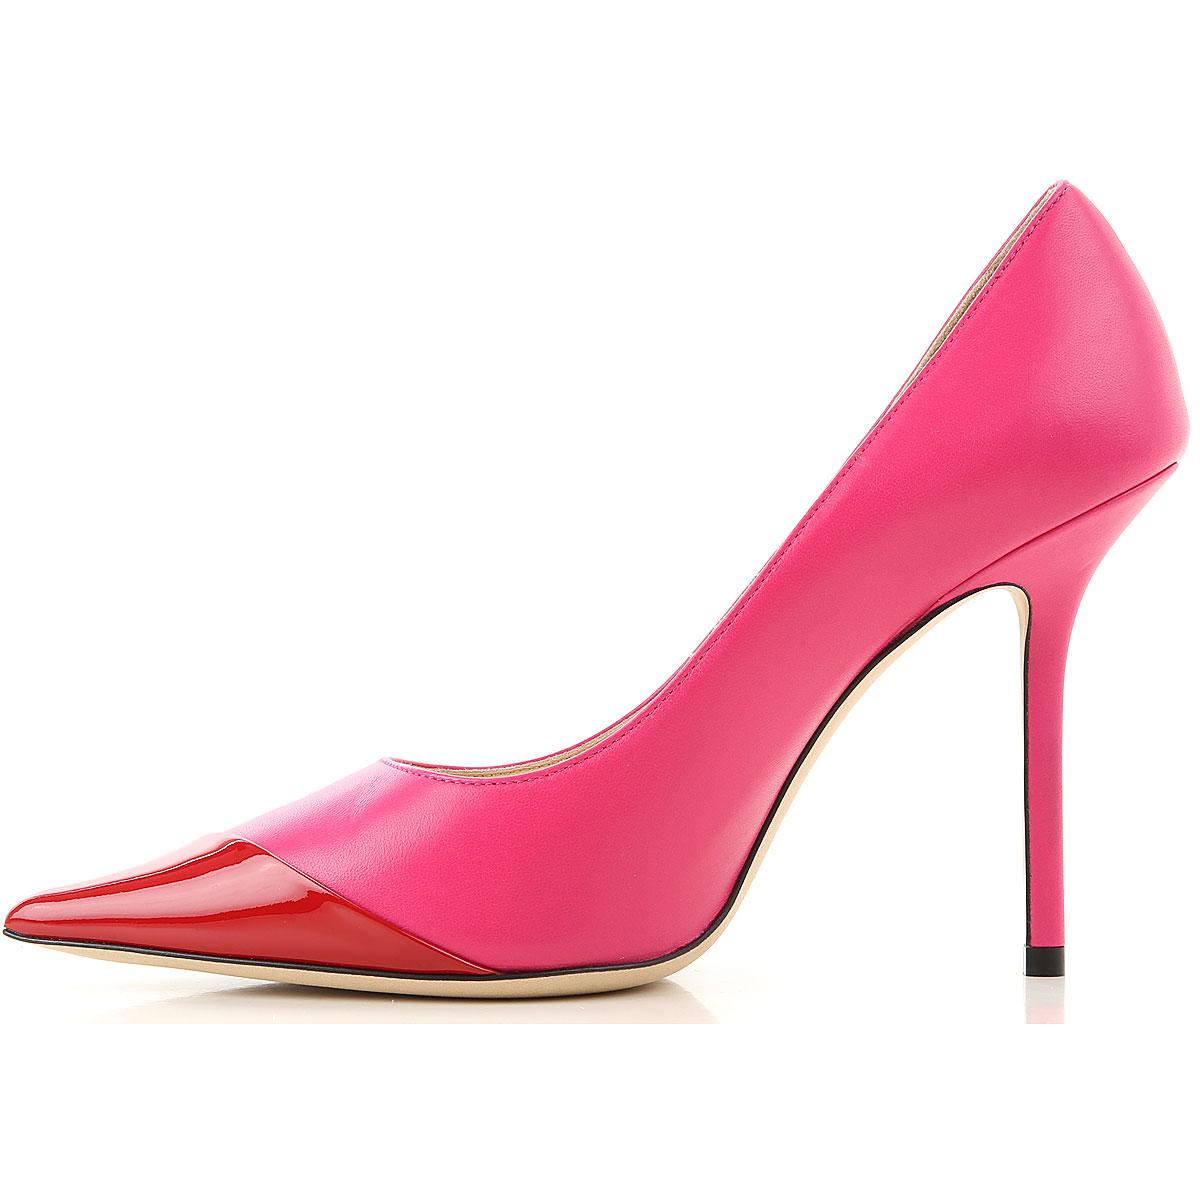 Jimmy Choo Leather Pumps & High Heels For Women in Hot Pink (Pink) - Lyst